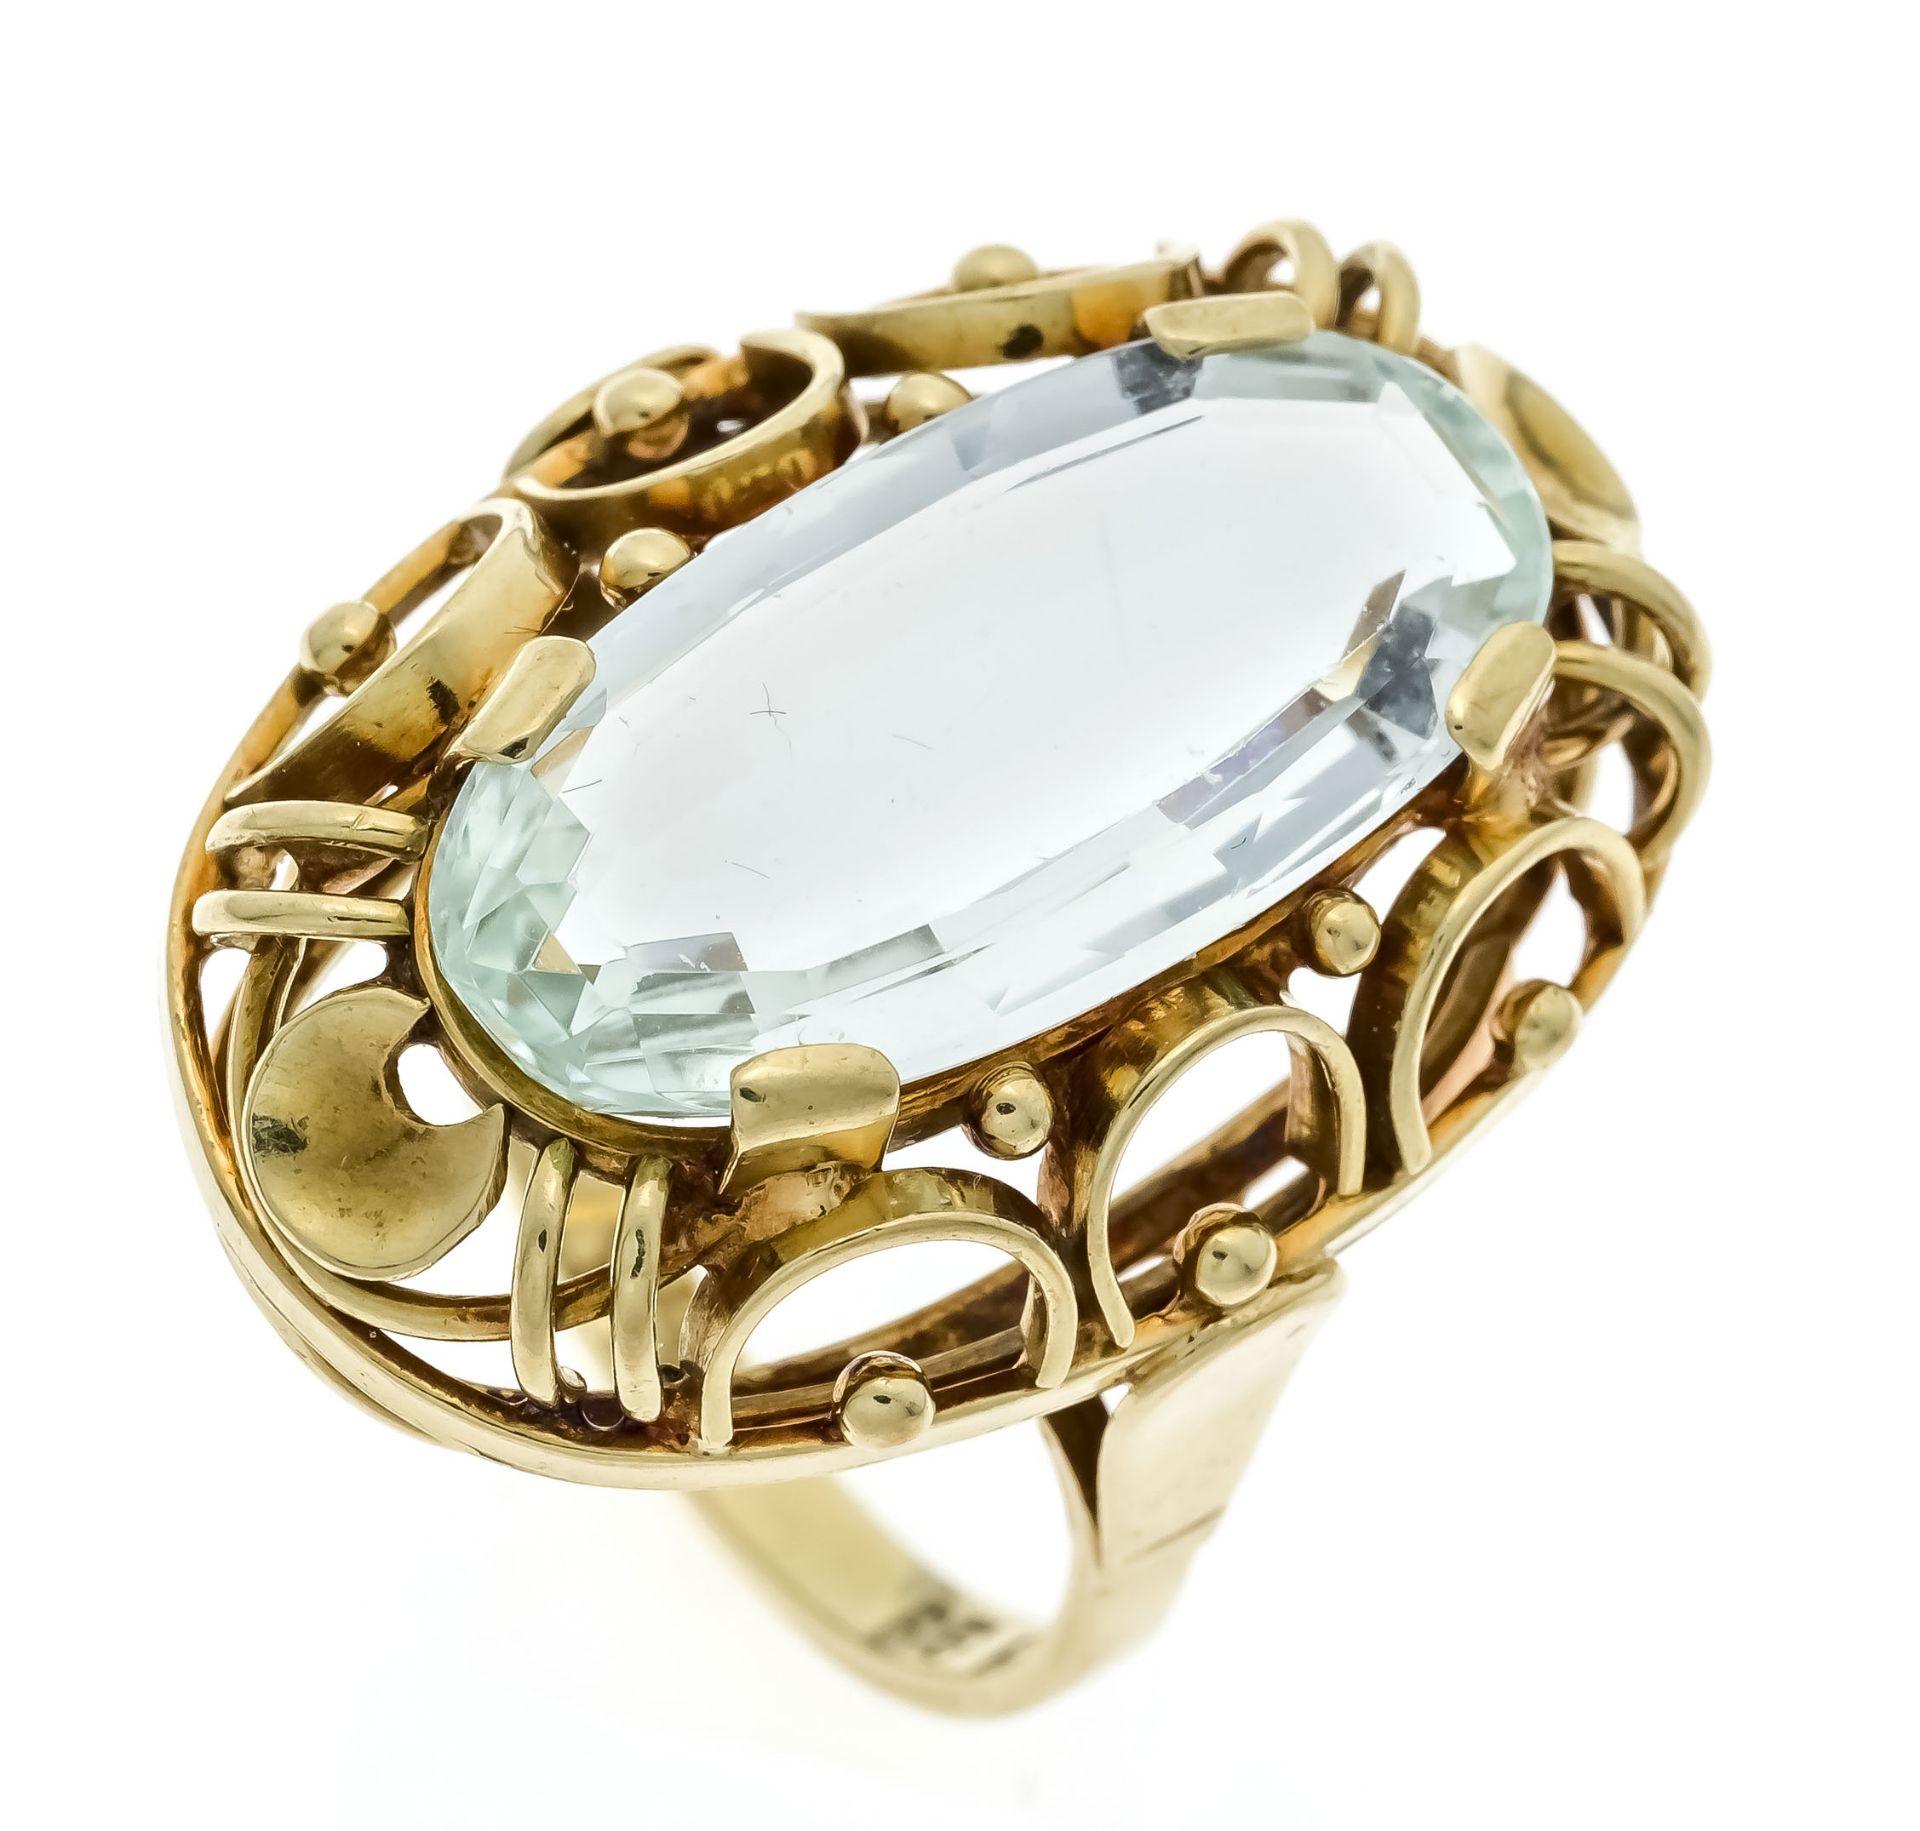 Aquamarine ring GG 585/000 with an oval faceted aquamarine 20 x 10 mm, RG 56, 7.9 g